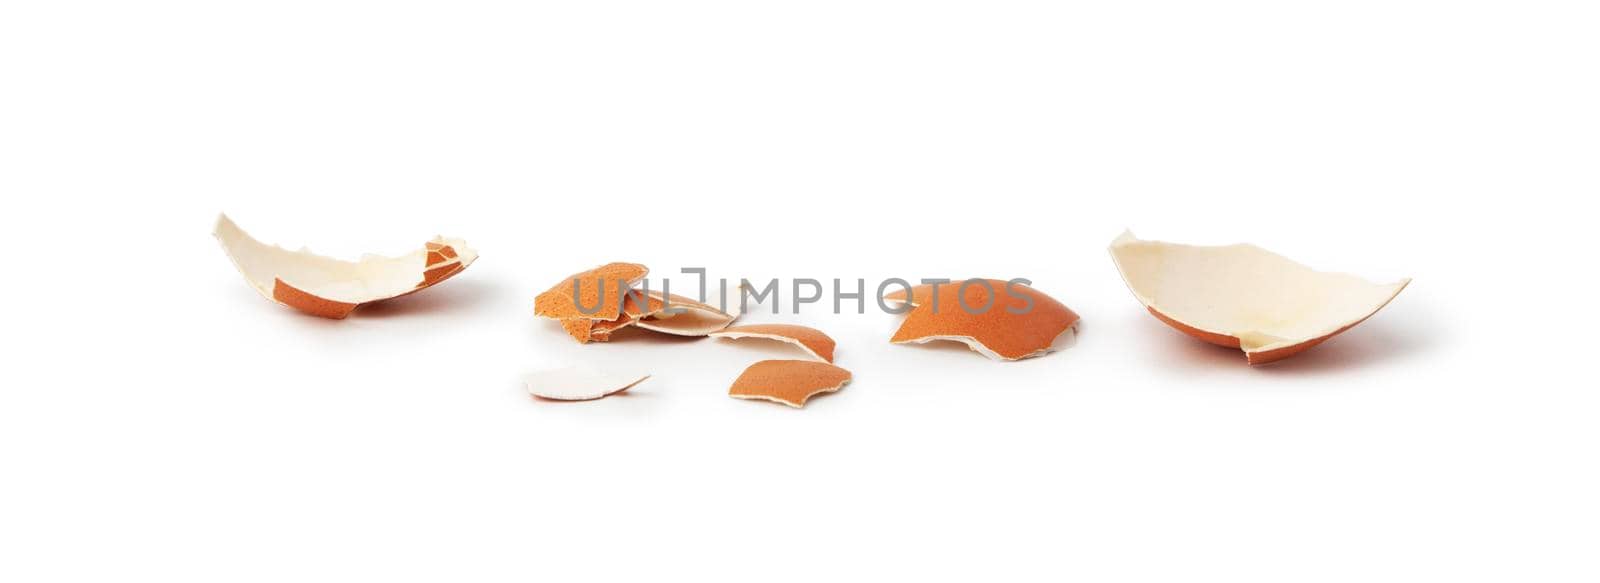 remains of eggs shell closeup isolated on white background